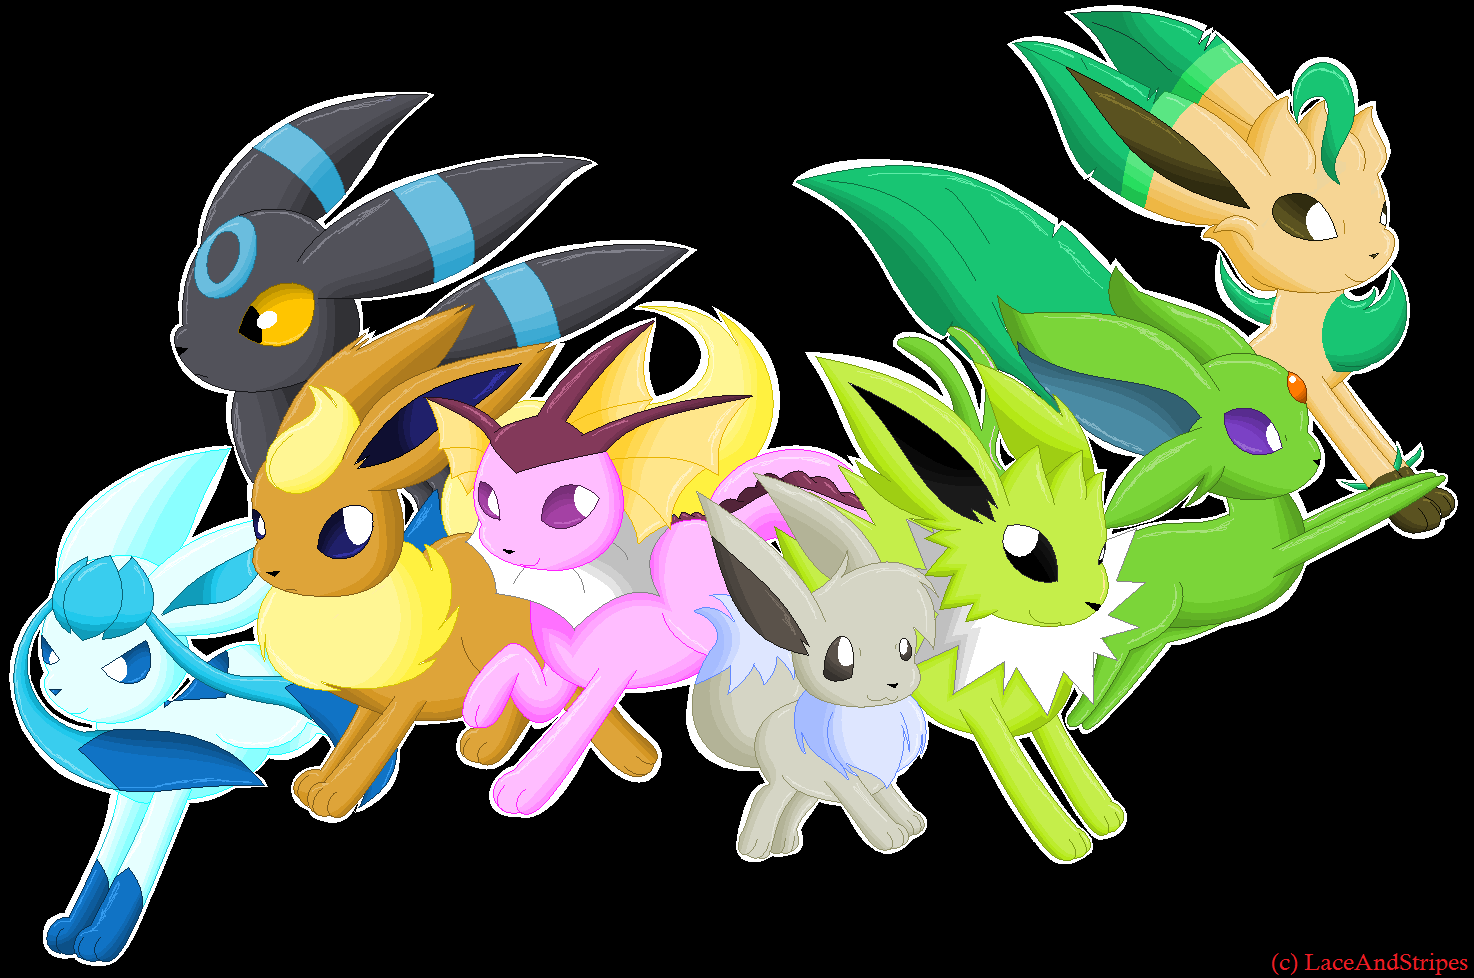 Team Eevee, Move out! :SHINY